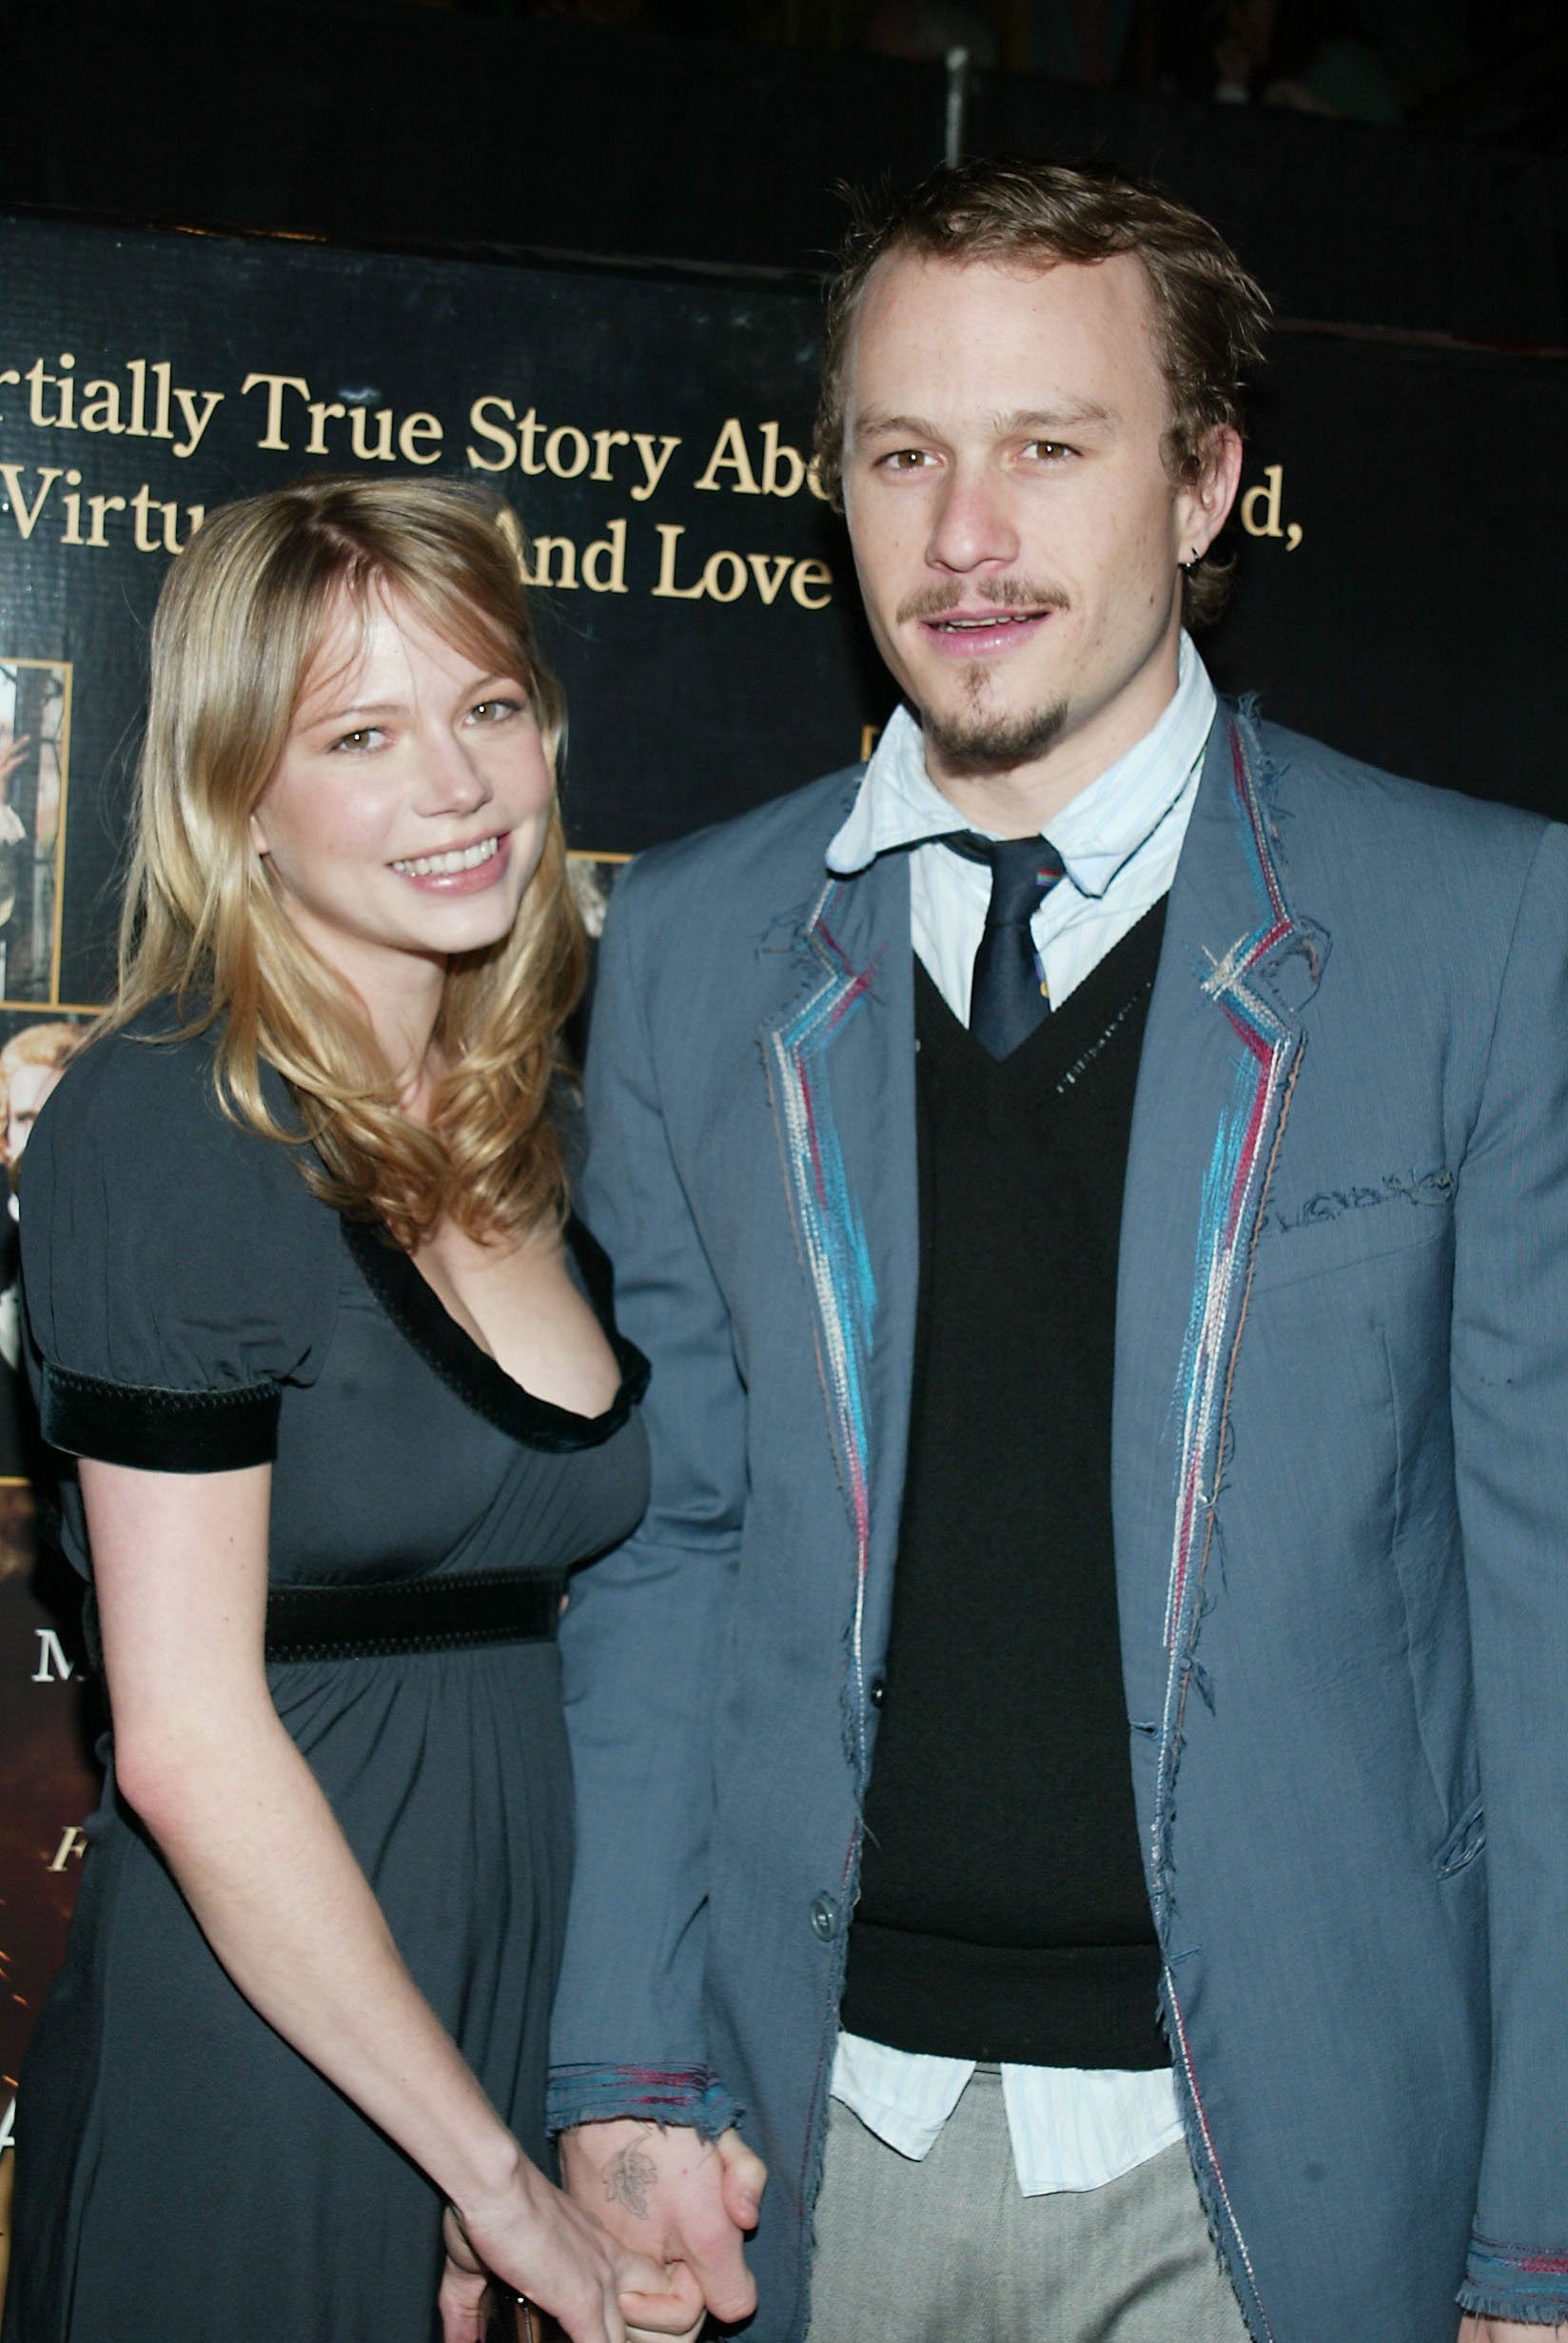 Michelle Williams and Heath Ledger during the premiere of "Casanova" on December 11, 2005 ┃Source: Getty Images